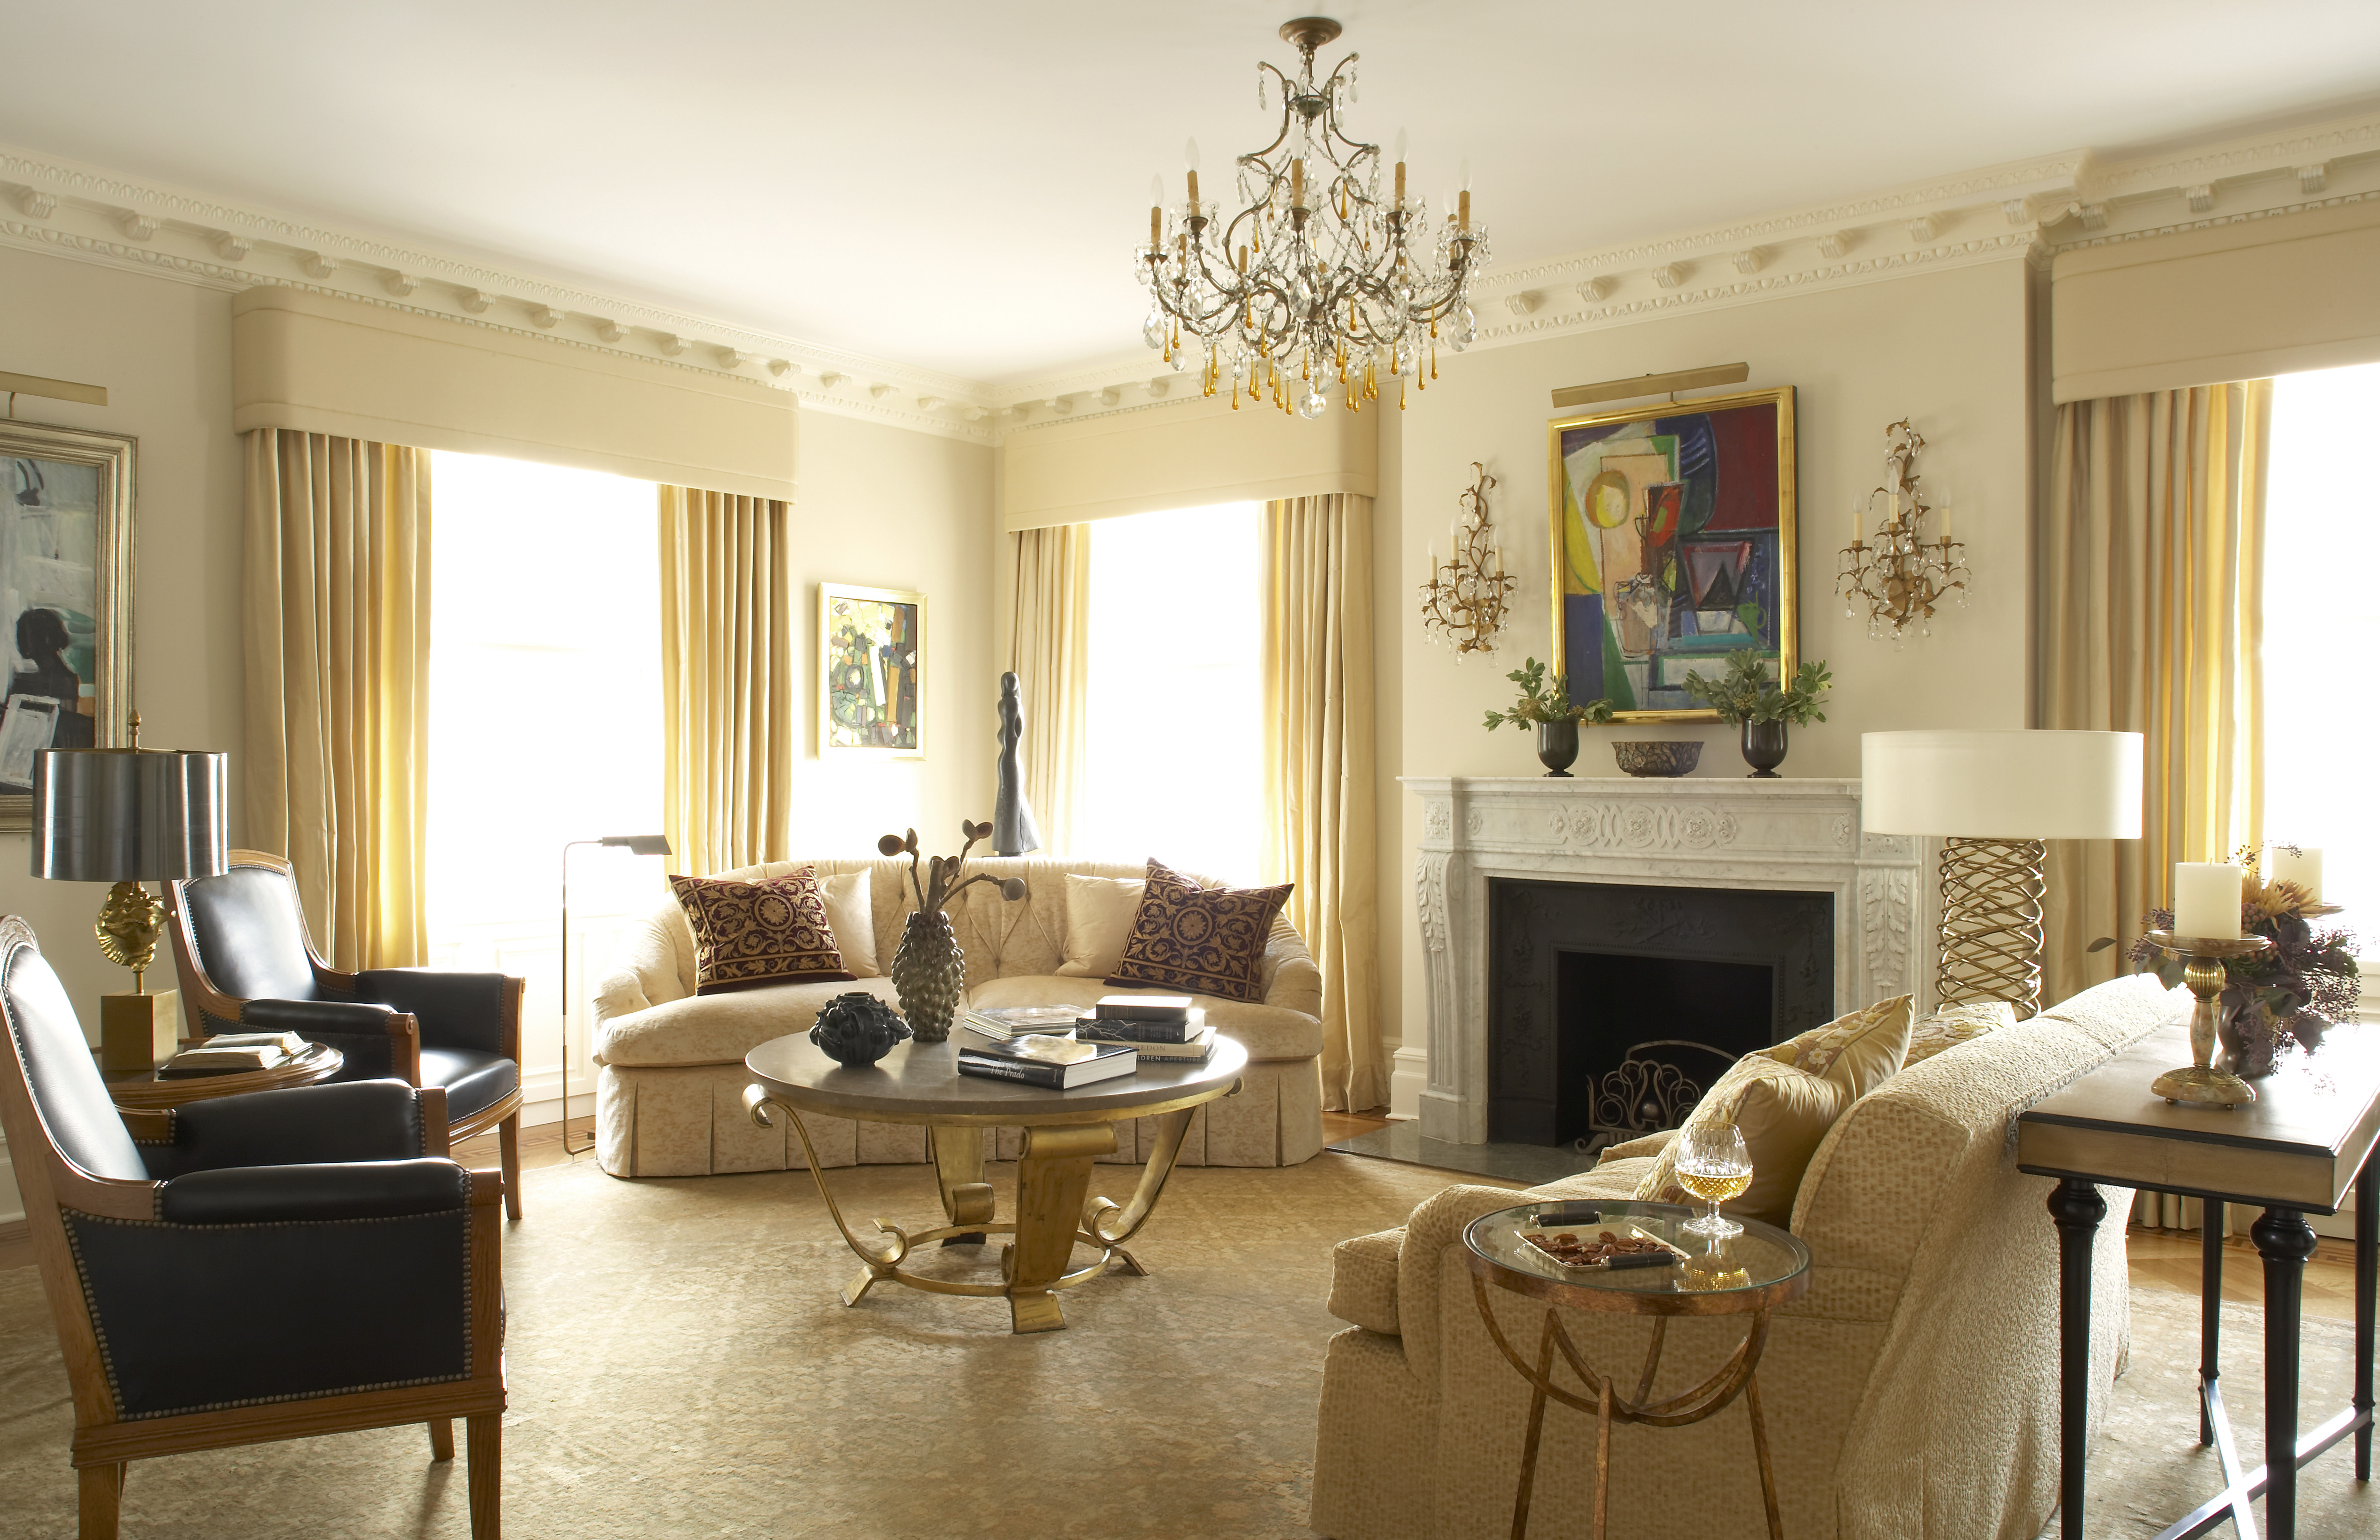  Traditional Living Room. Central Park West  by Goralnick Architecture and Deisgn.